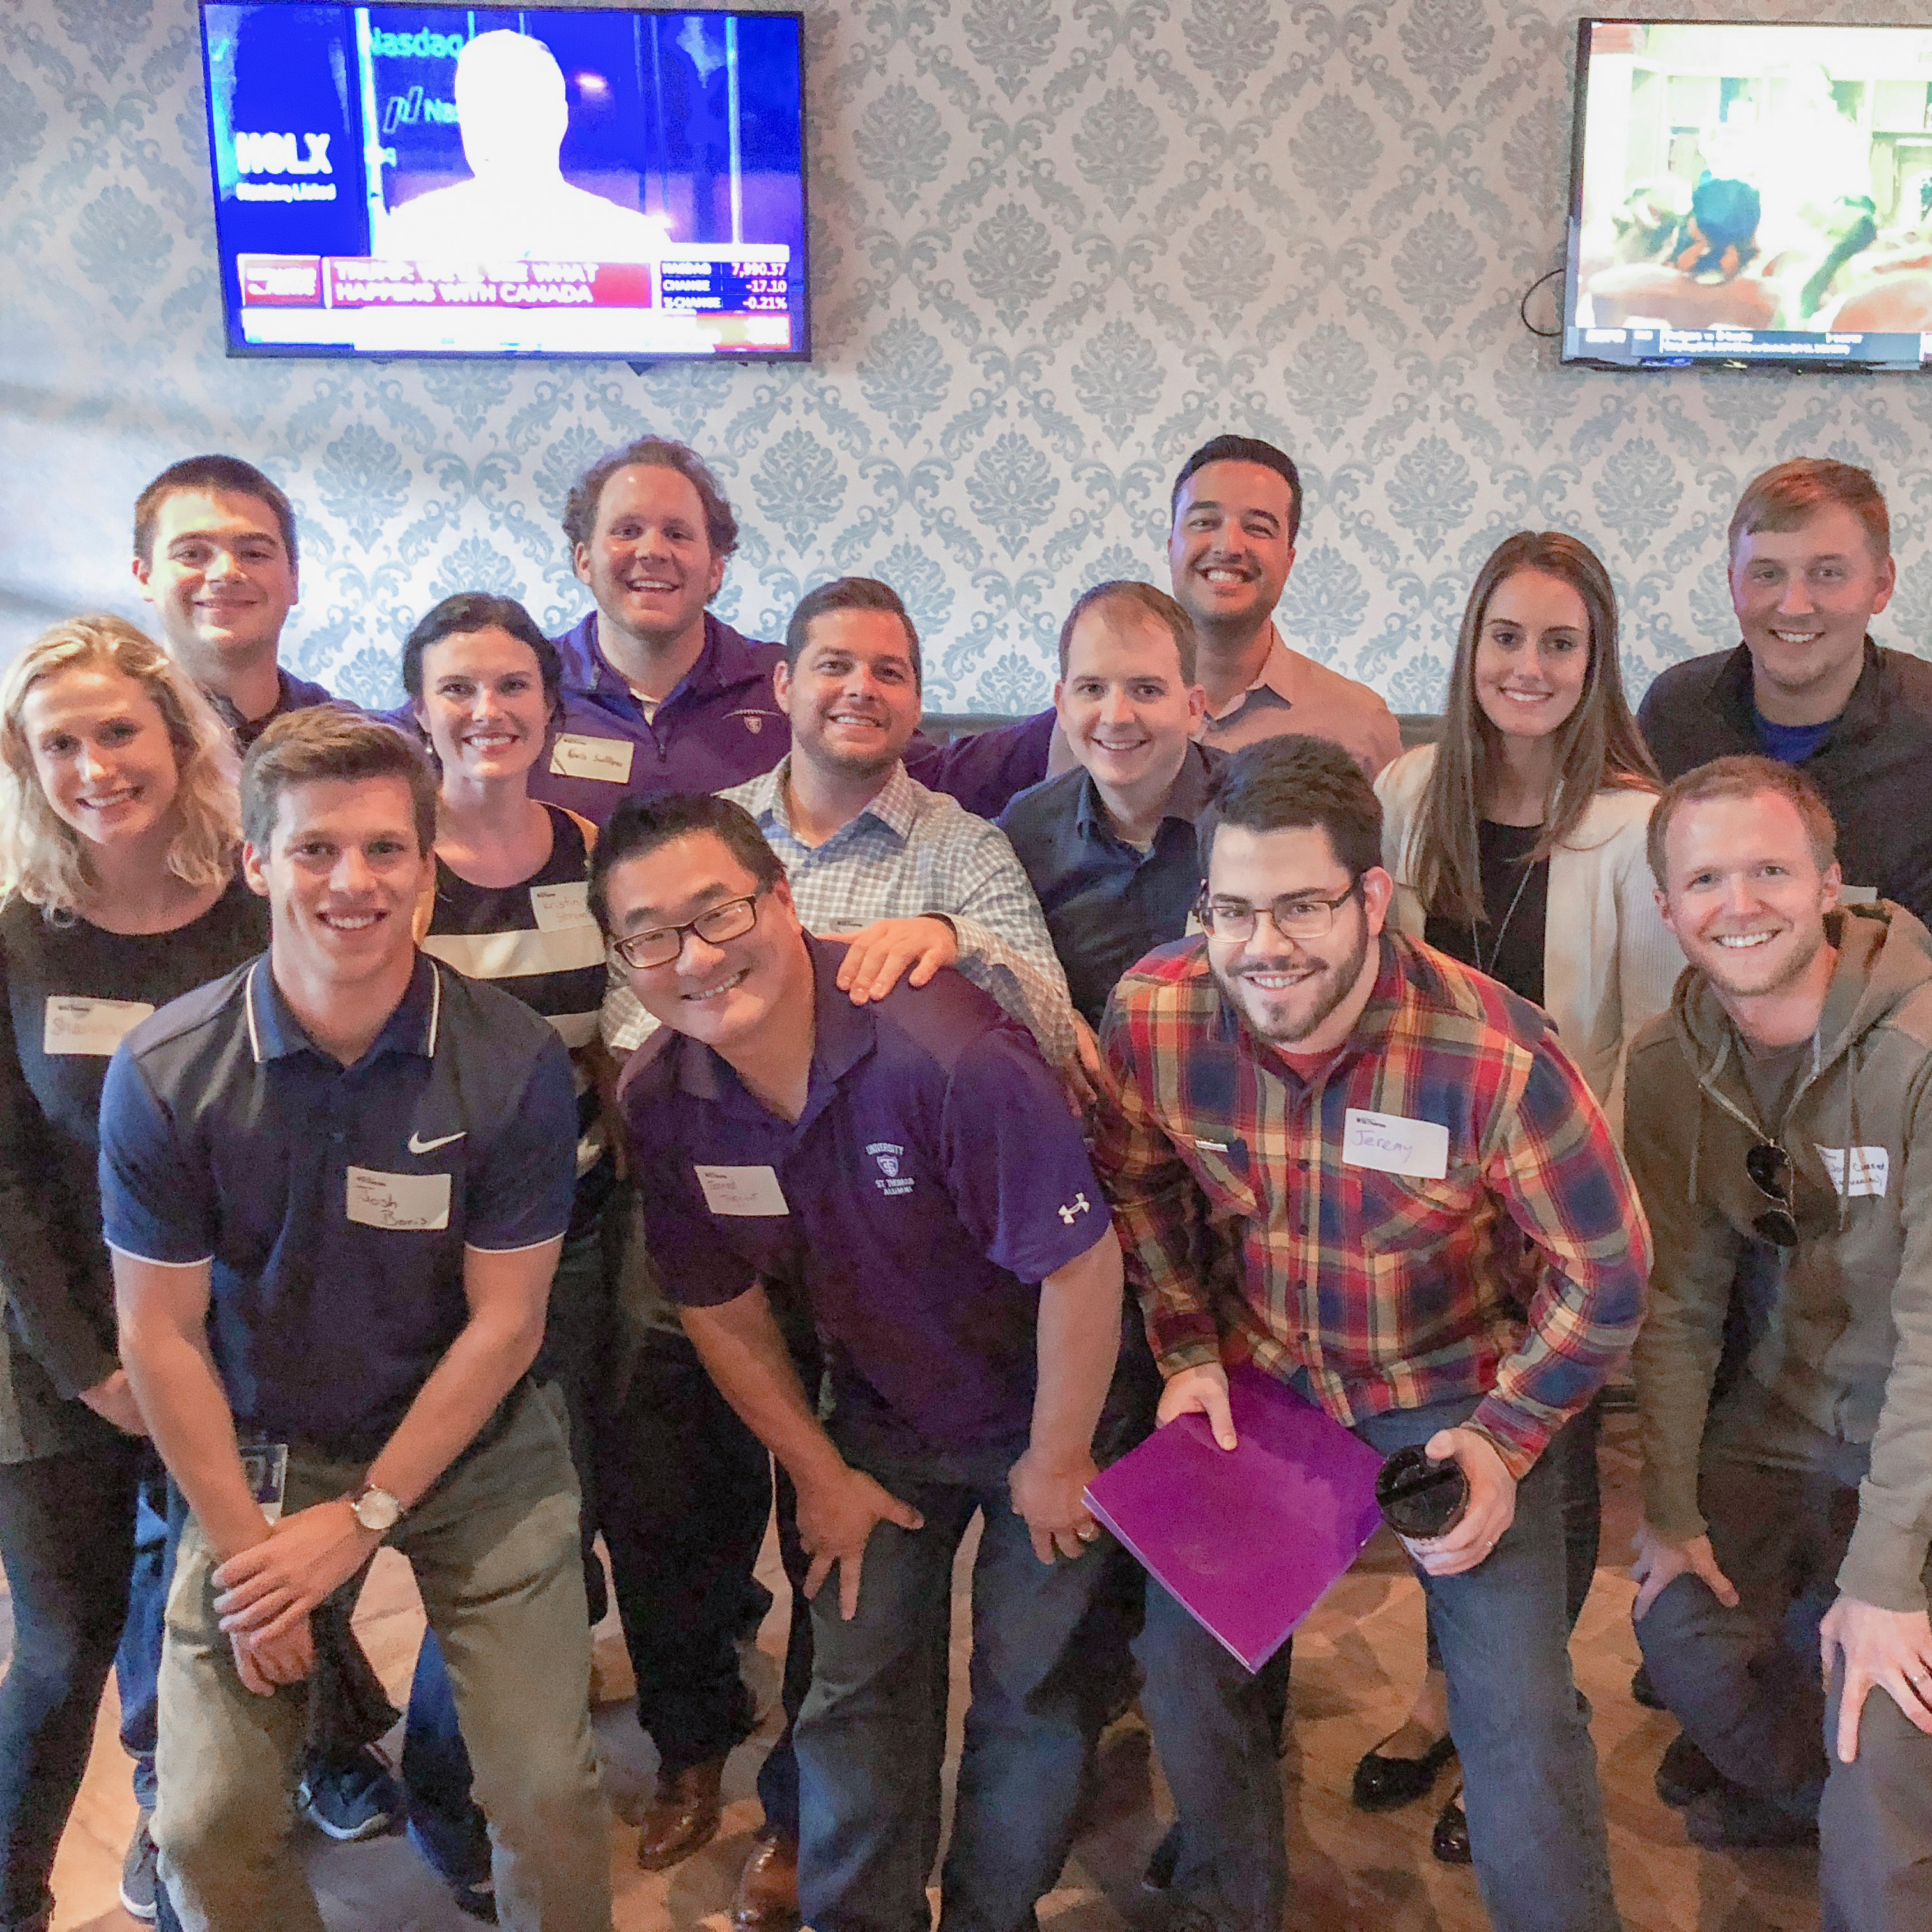 us bank employees pose for a group picture at a company event